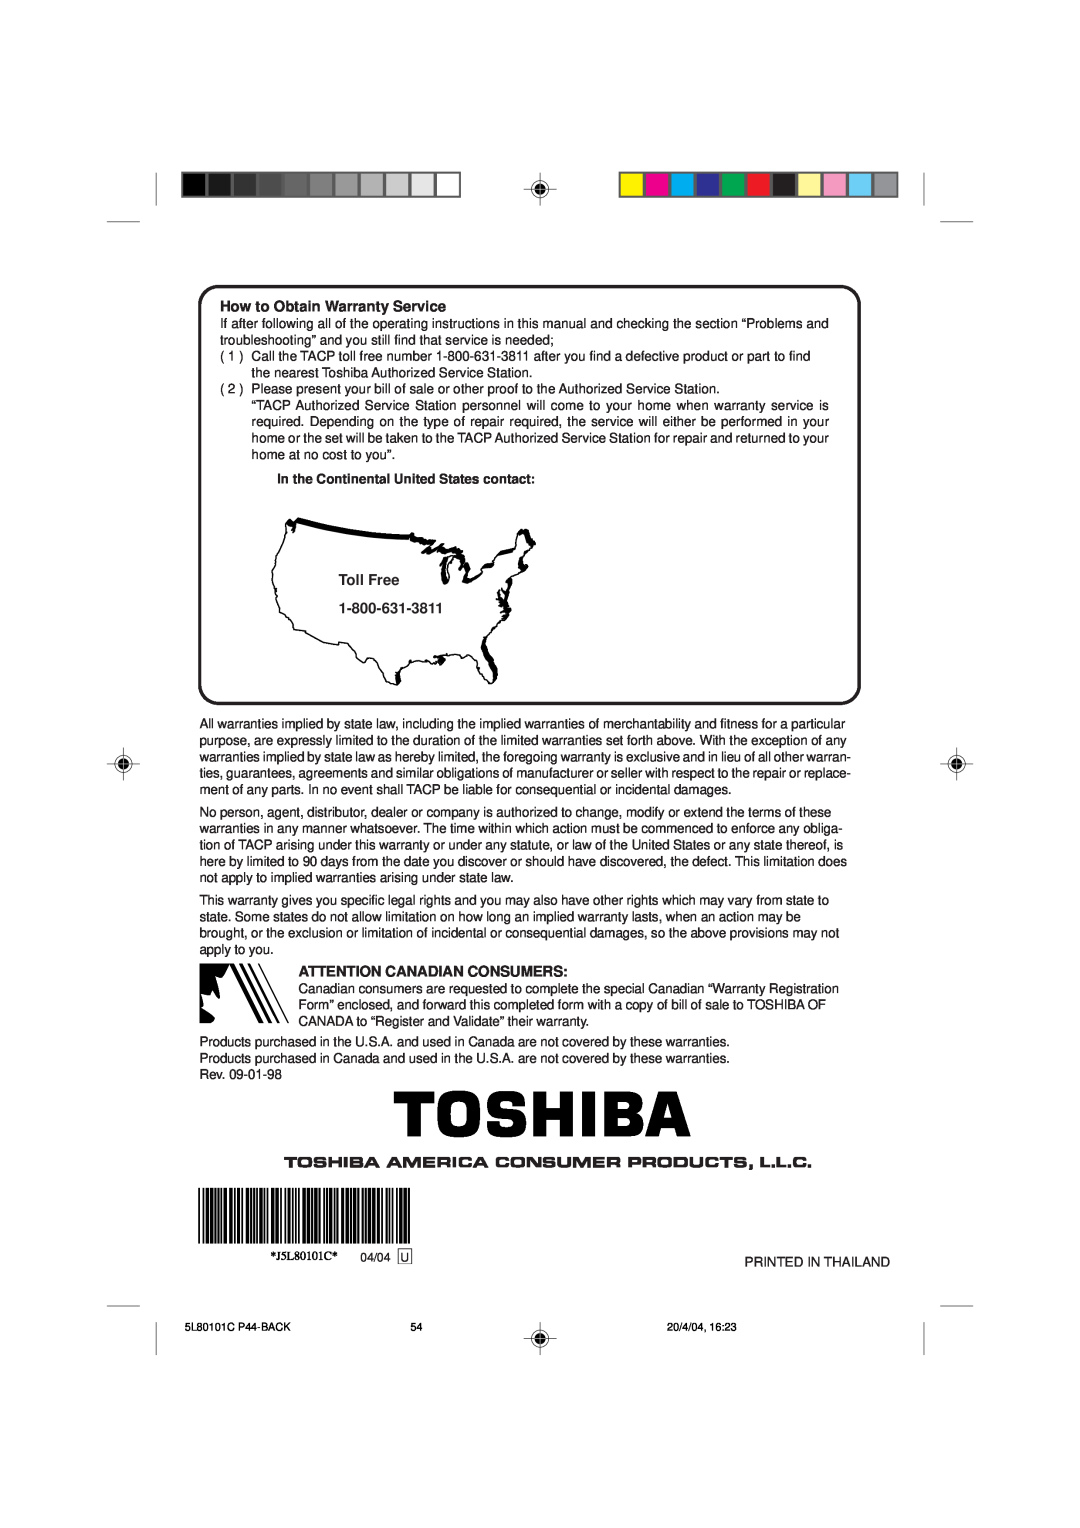 Toshiba MV13P2 owner manual How to Obtain Warranty Service, Toll Free, Attention Canadian Consumers 